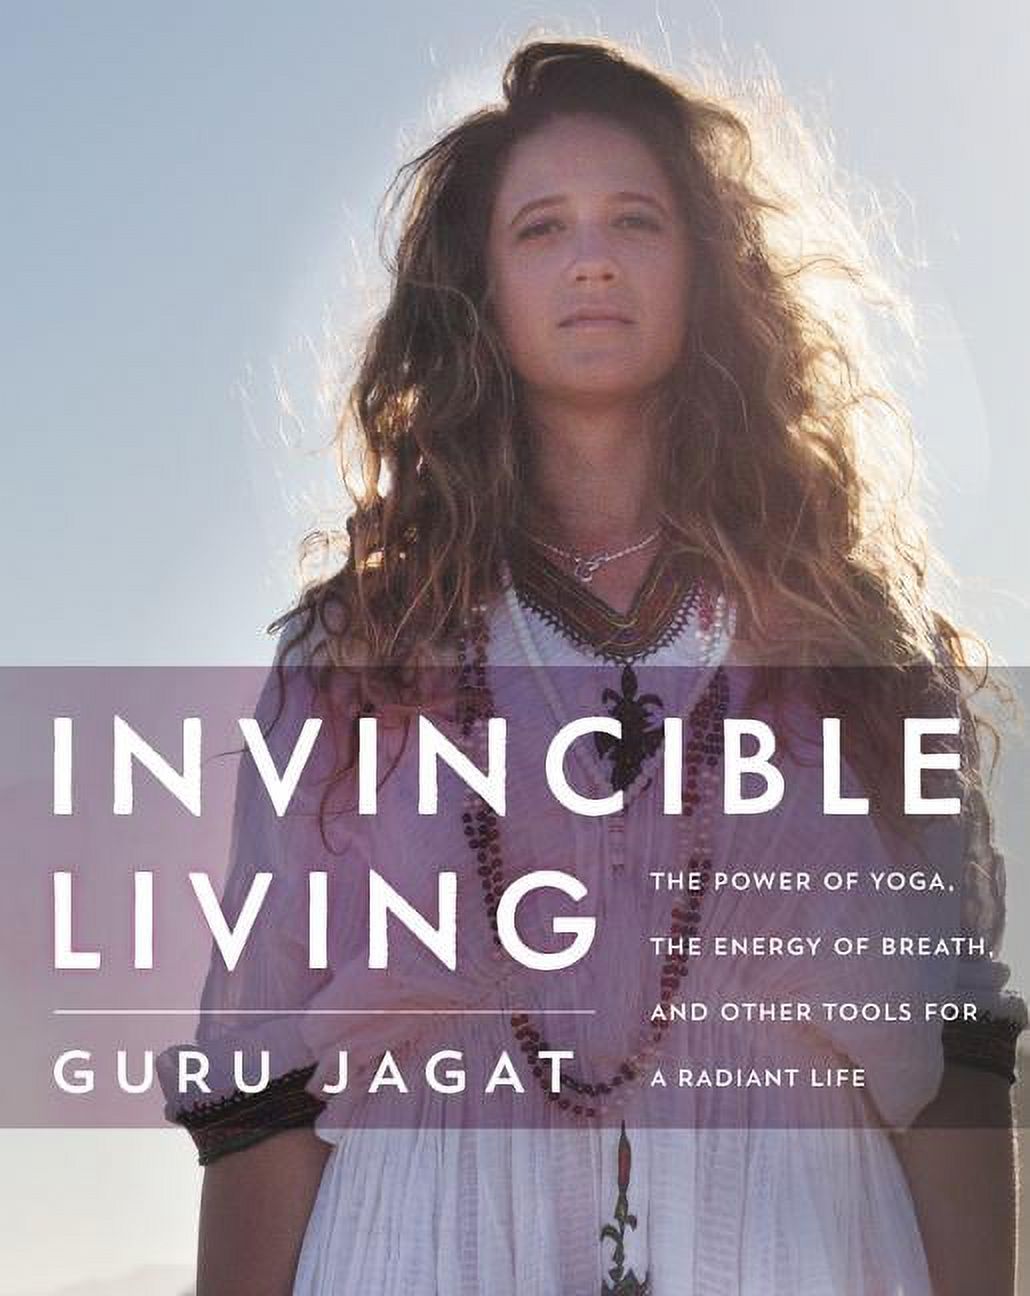 Invincible Living: The Power of Yoga, the Energy of Breath, and Other Tools for a Radiant Life (Hardcover) - image 1 of 1